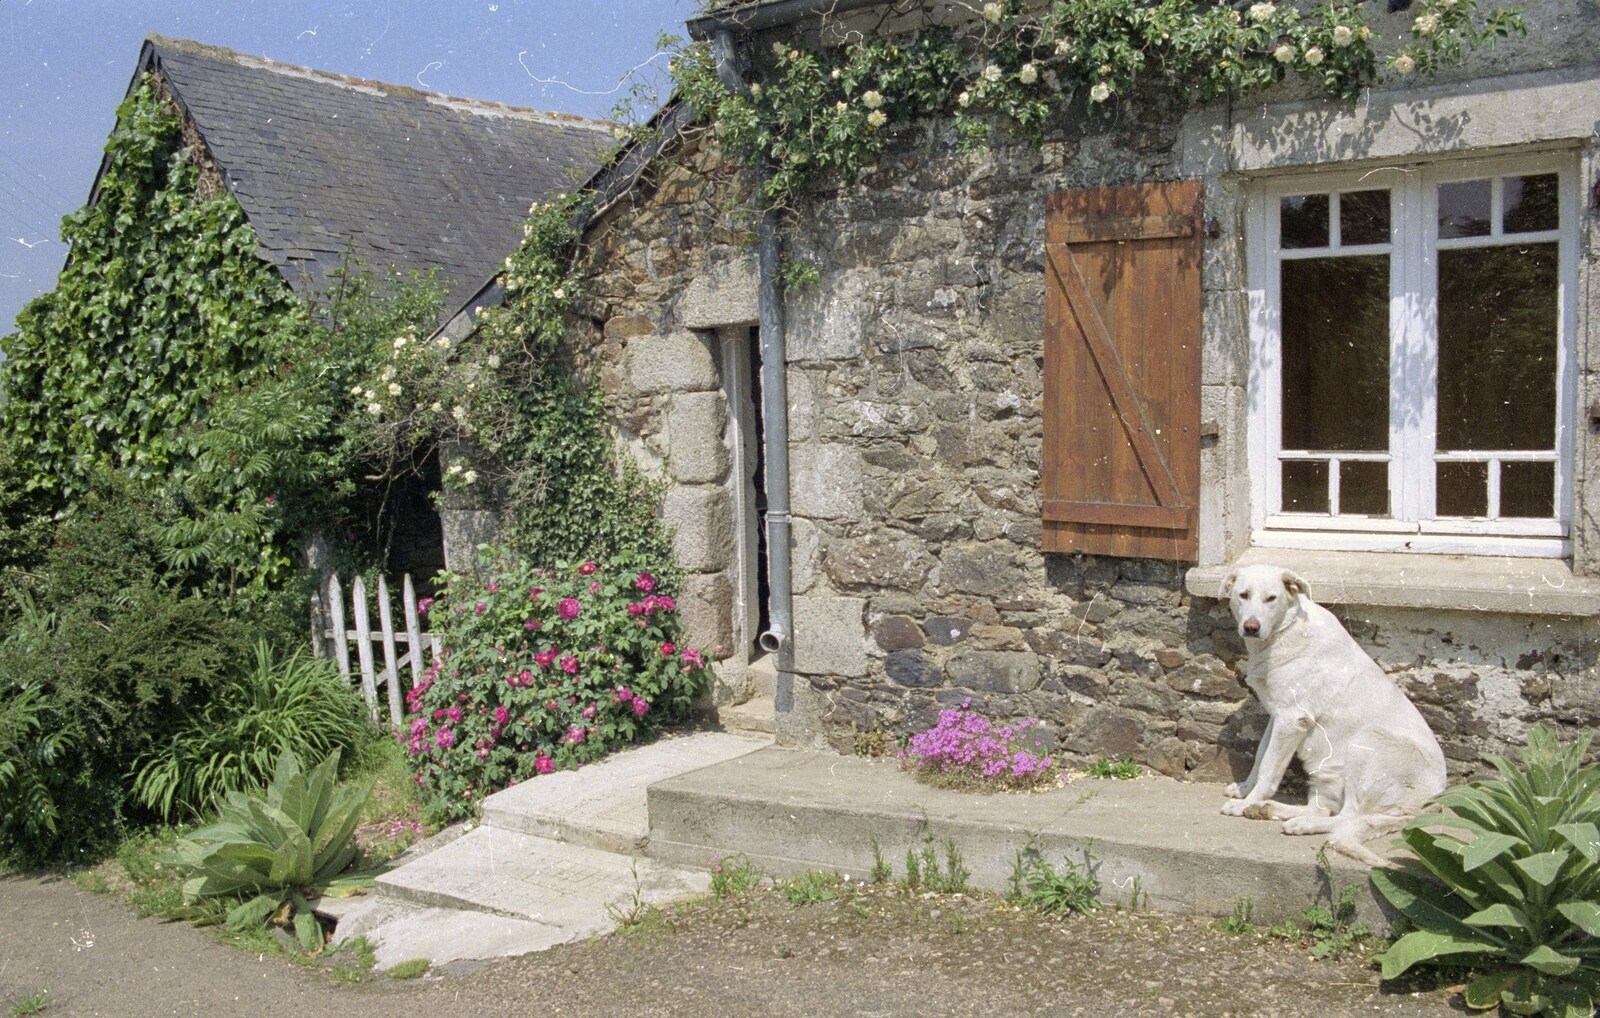 A local white dog hangs around outside from A Trip To Huelgoat, Brittany, France - 11th June 1990